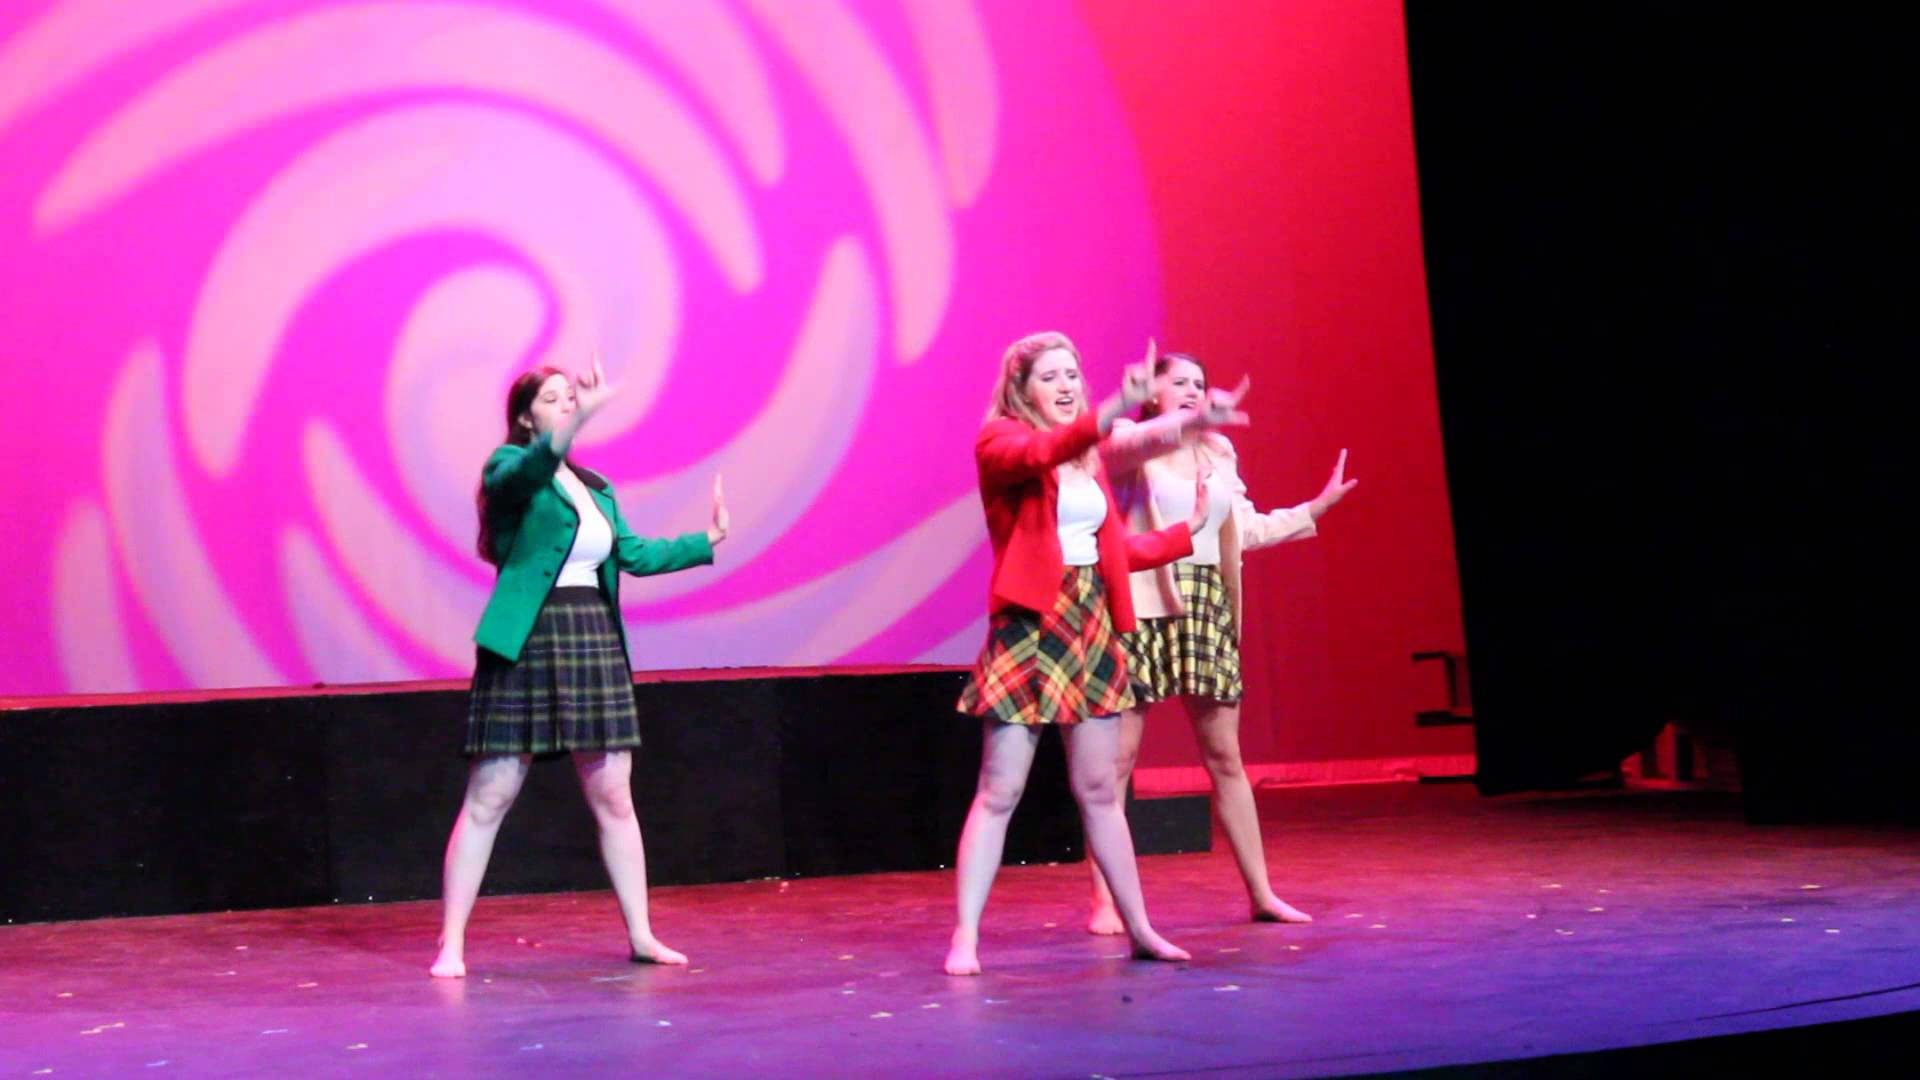 Heathers Performing On Stage Background